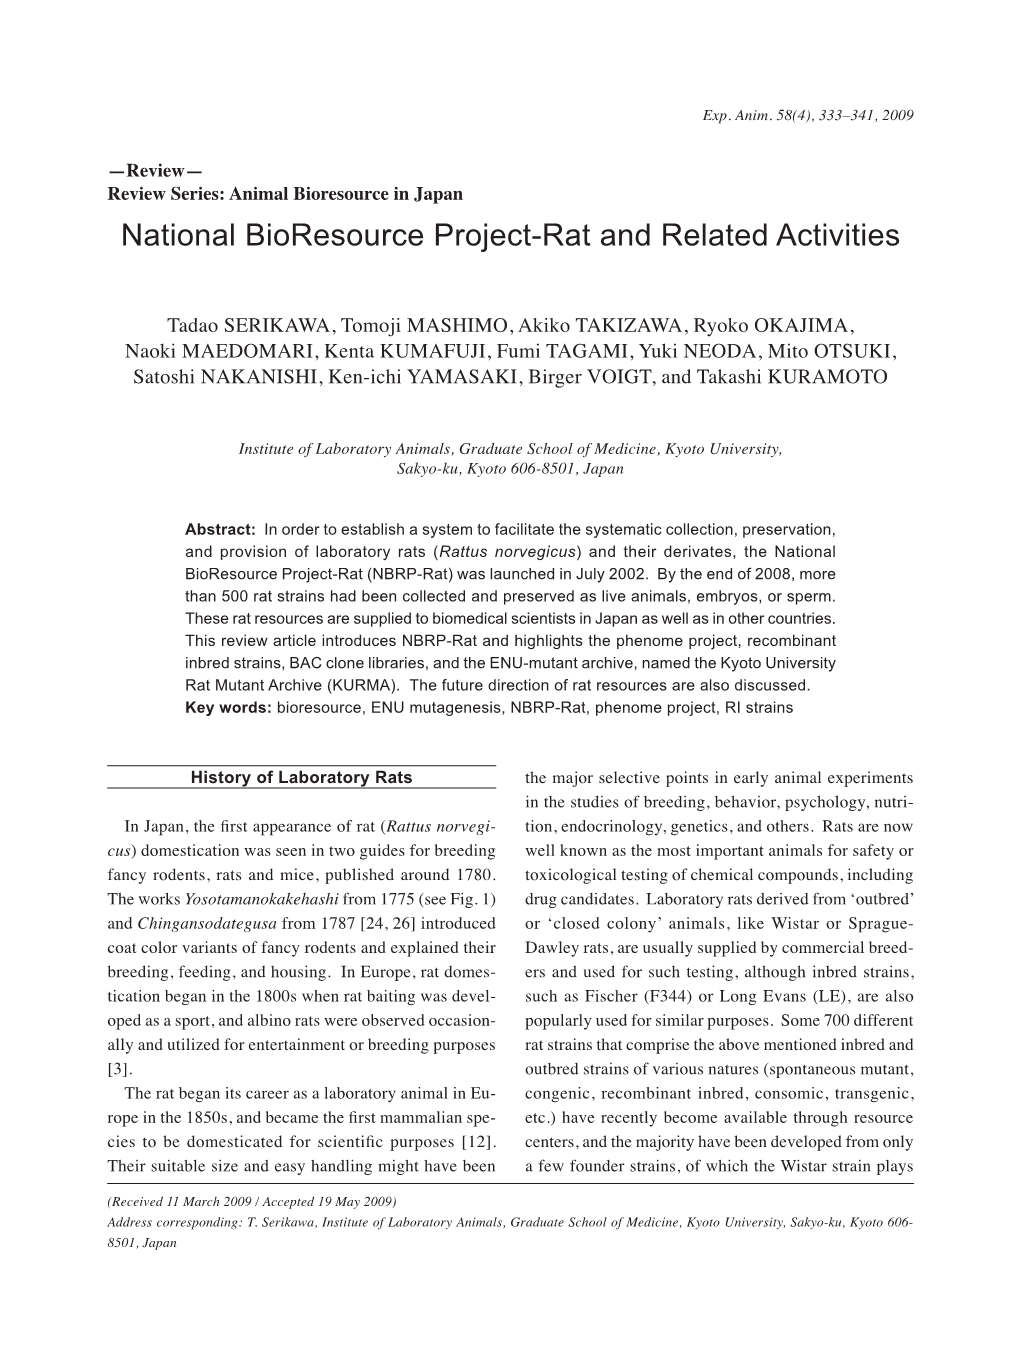 National Bioresource Project-Rat and Related Activities